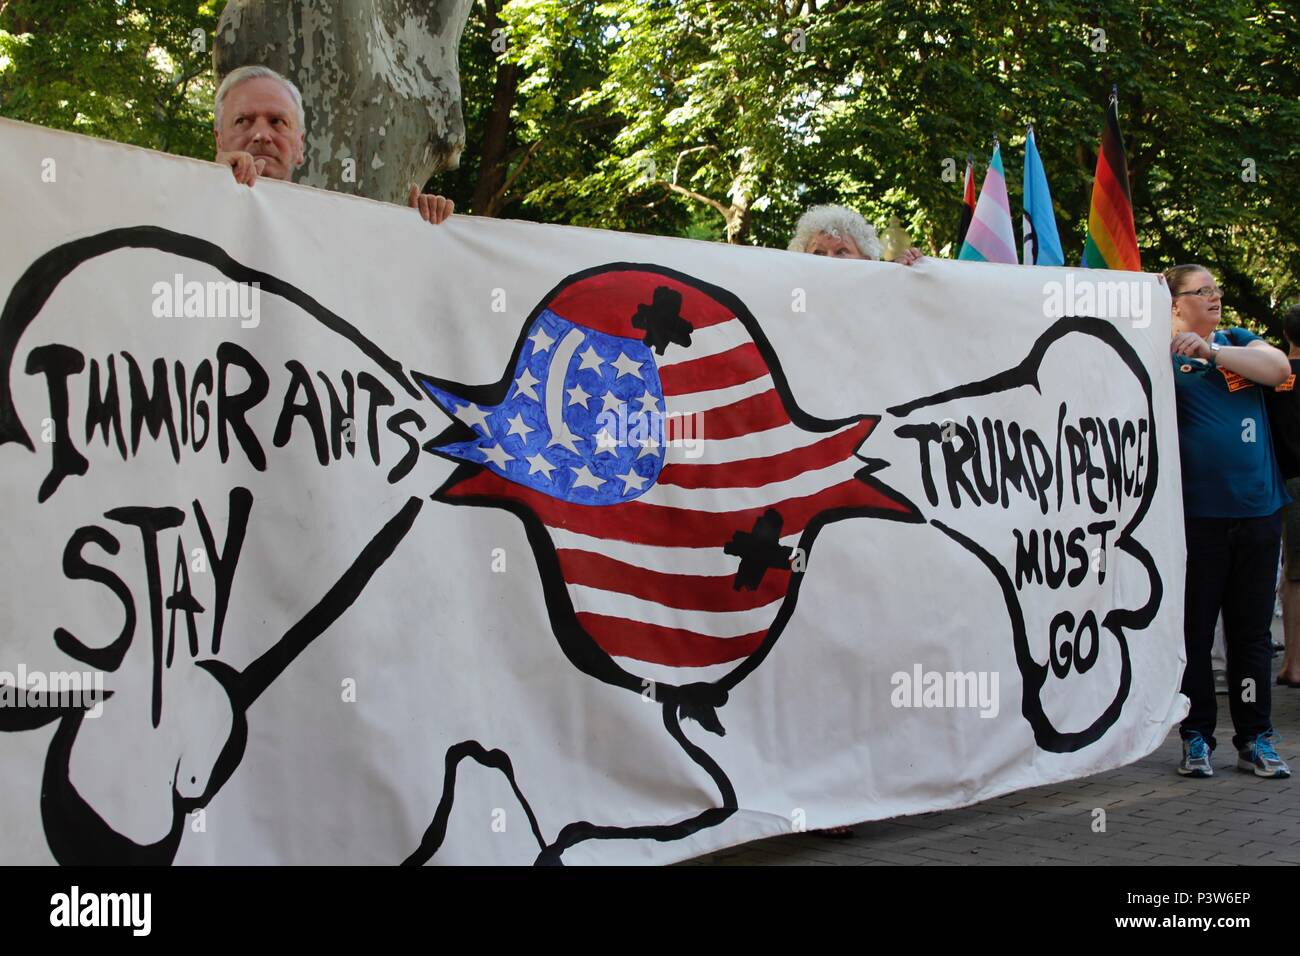 Philadelphia, PA, USA - June 19, 2018: Thousands protest the Trump Administration policy of separating immigrant children and their parents at the U.S.-Mexico border. The demonstration coincides with a visit to Philadelphia by Vice President Mike Pence at a fundraiser in support of GOP gubernatorial candidate Scott Wagner. Credit: Jana Shea/Alamy Live News Stock Photo